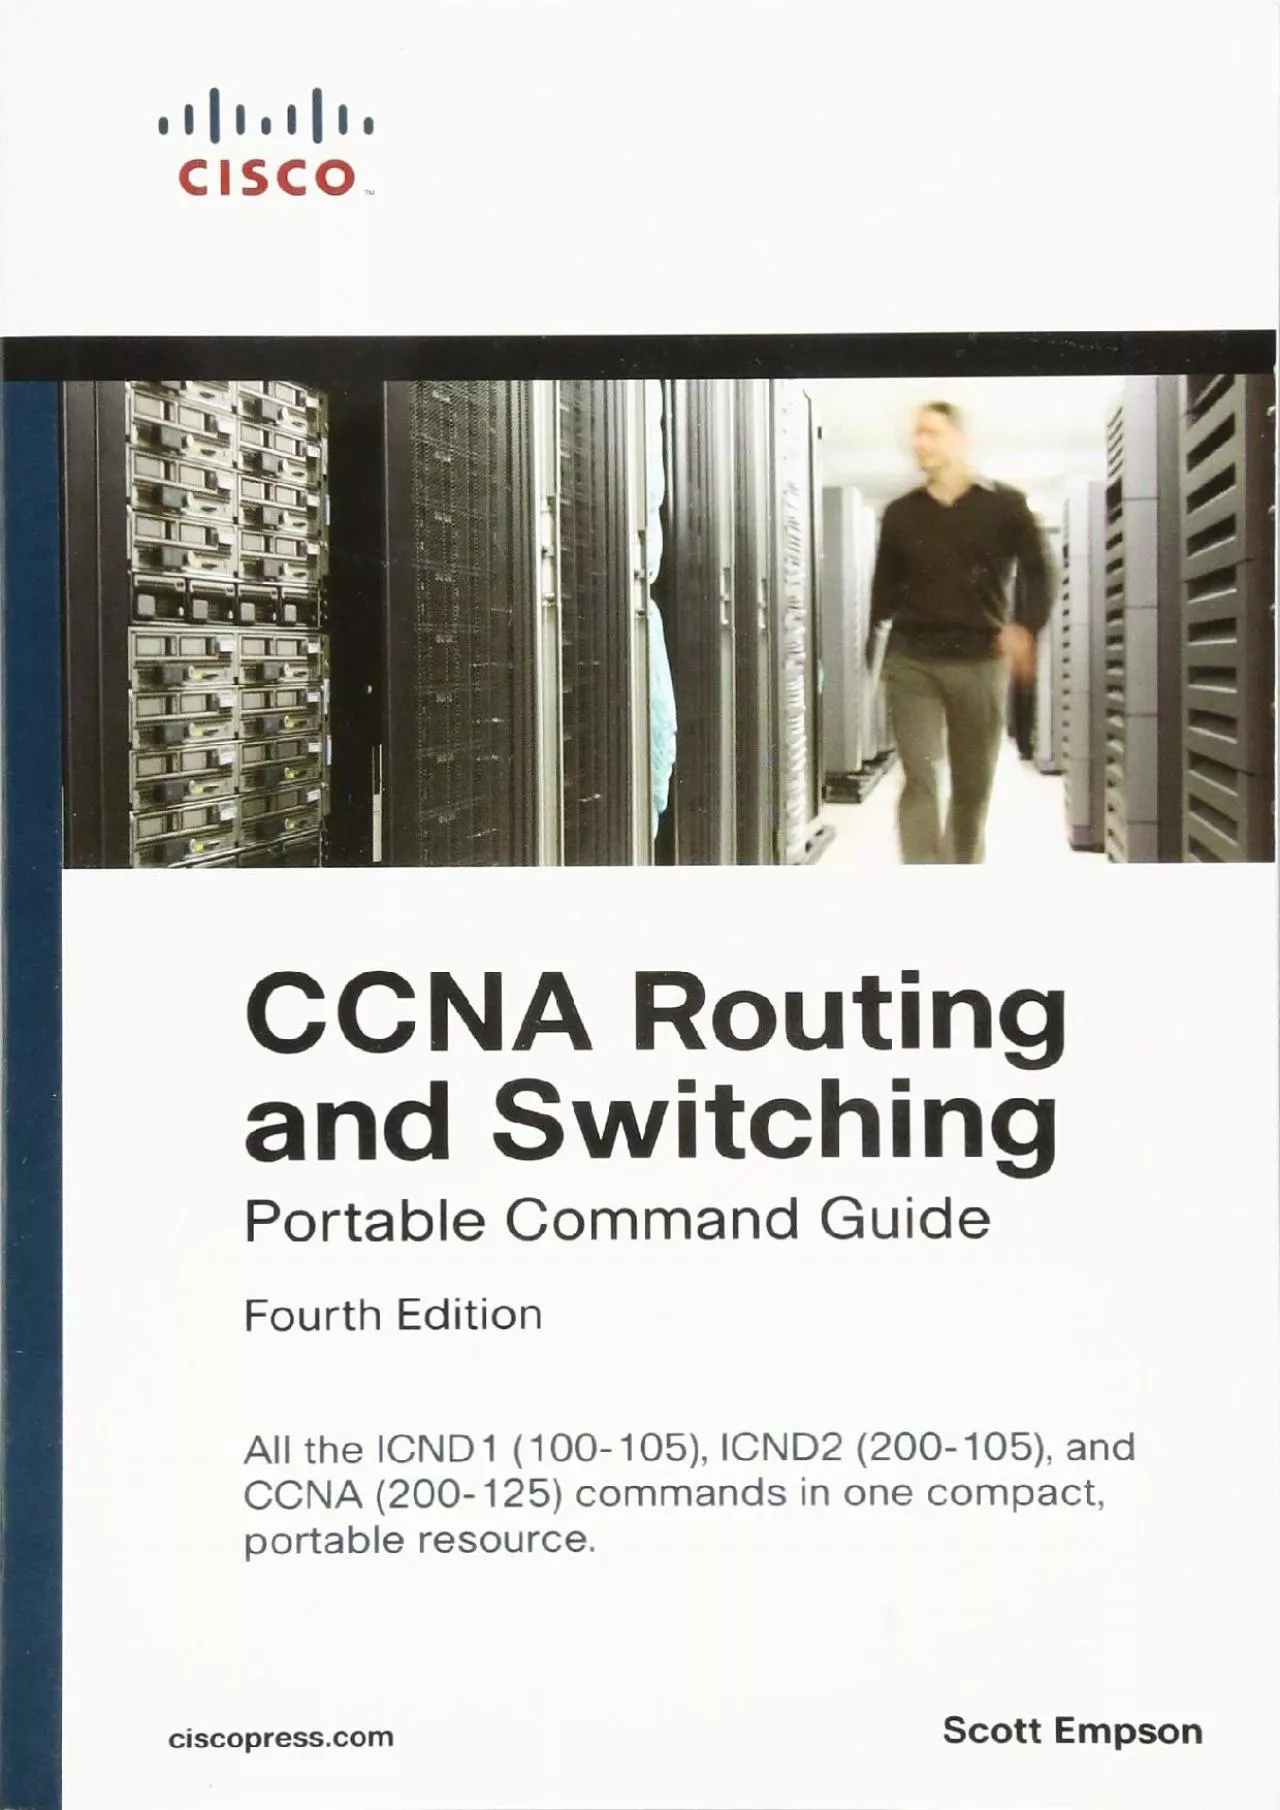 [DOWLOAD]-CCNA Routing and Switching Portable Command Guide (ICND1 100-105, ICND2 200-105,